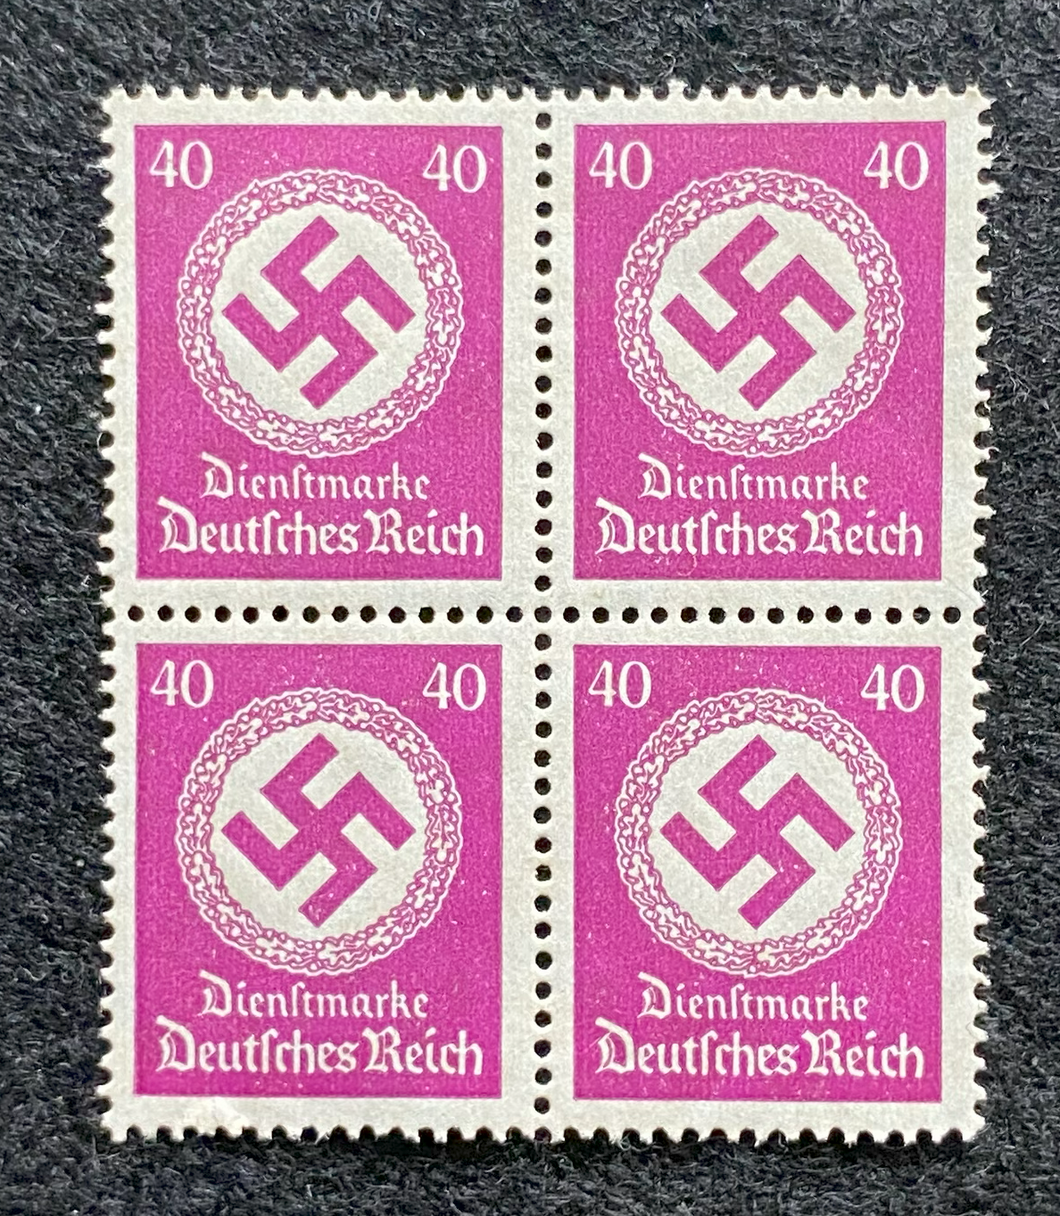 Antique WWII German Nazi Third Reich 40 Rp Stamp with SWASTIKA MNH Block of 4 - Collectors Couch